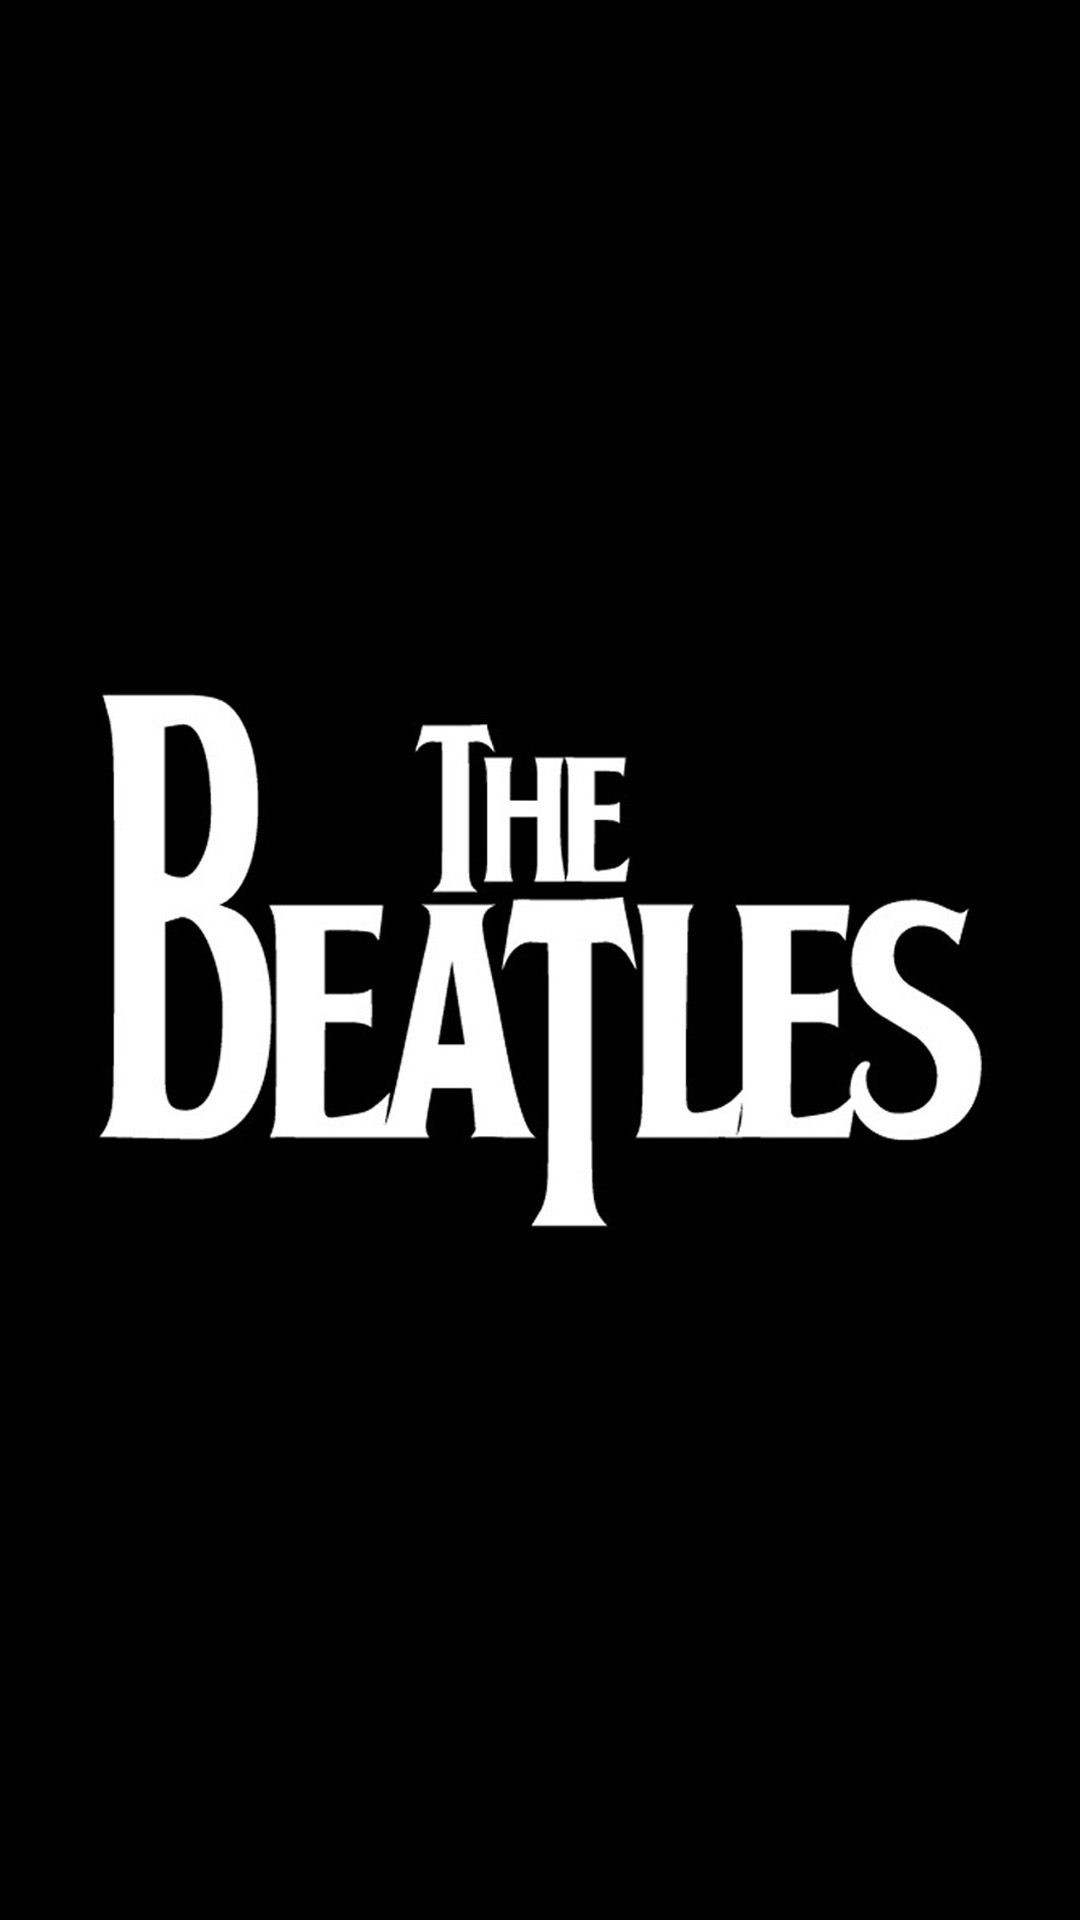 Beatles Wallpaper for iPhone (71+ images)